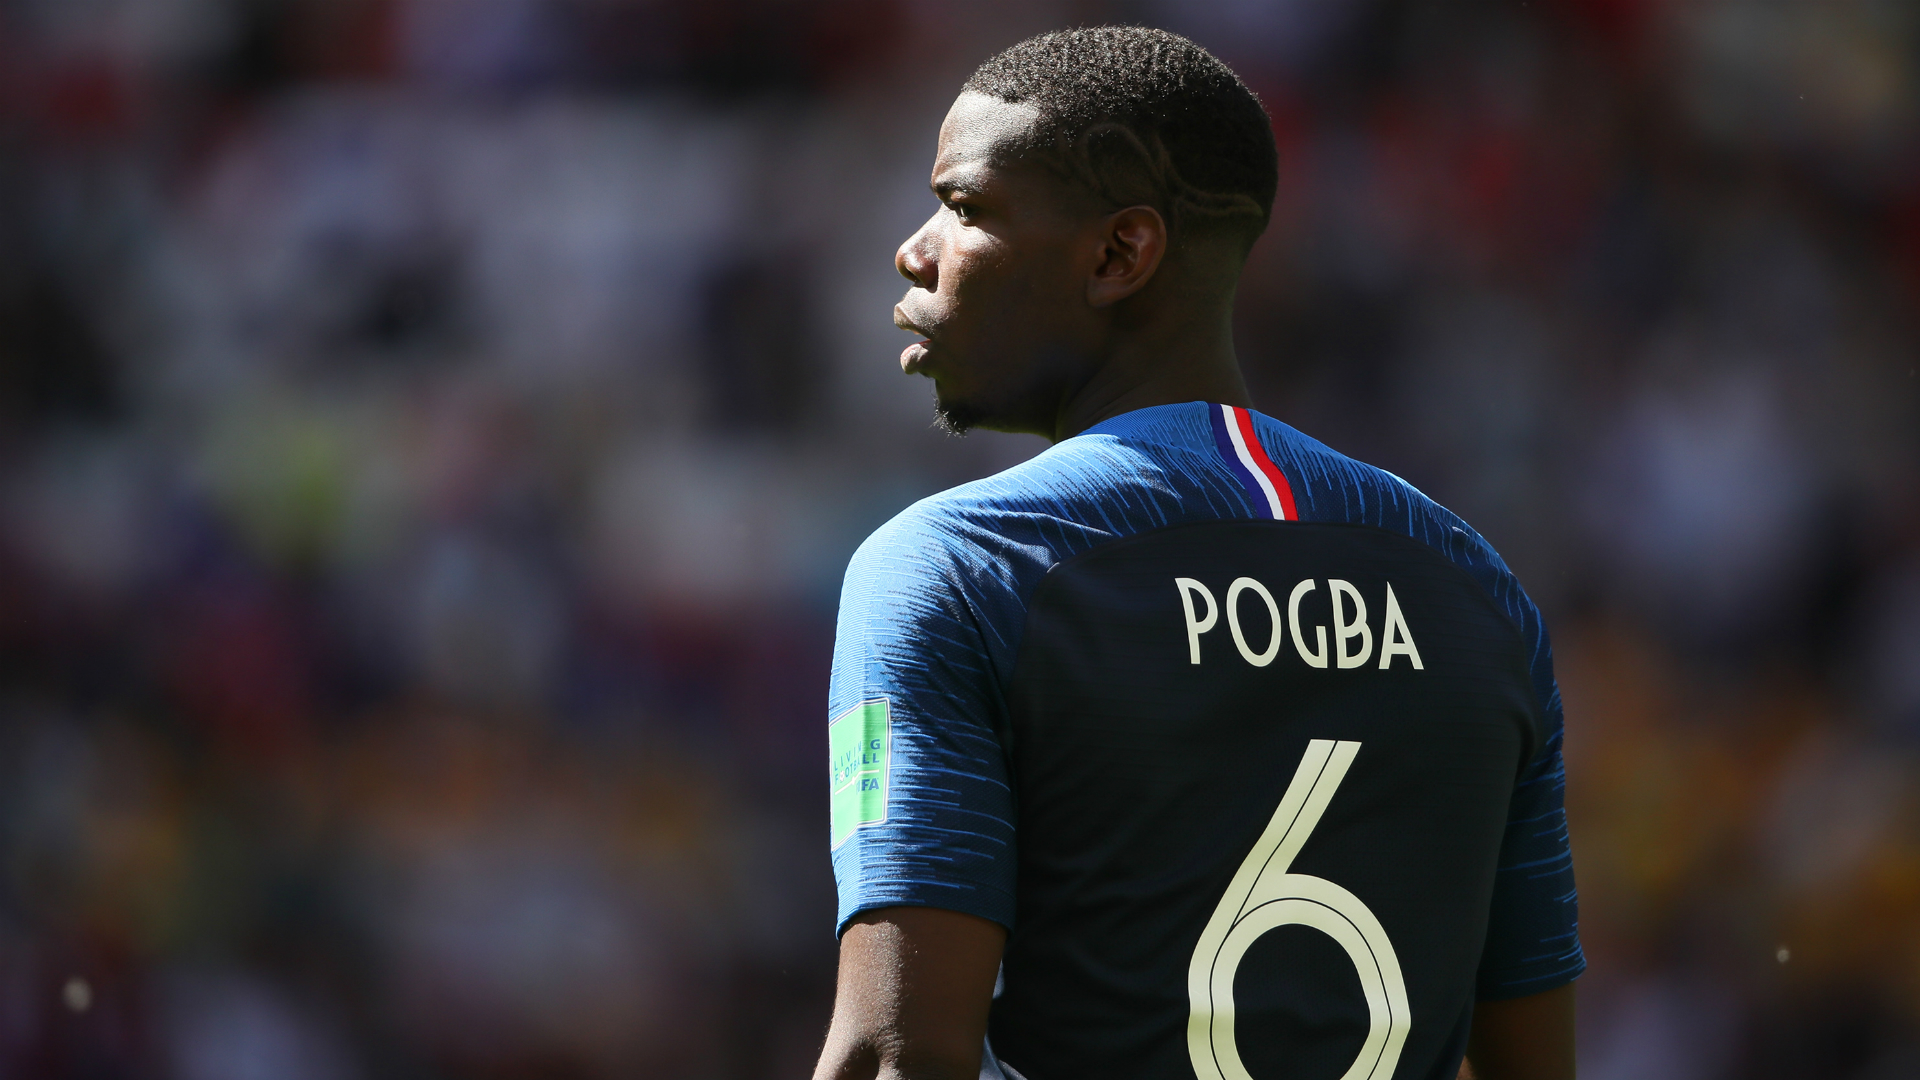 Pogba a natural leader for France. FOOTBALL News